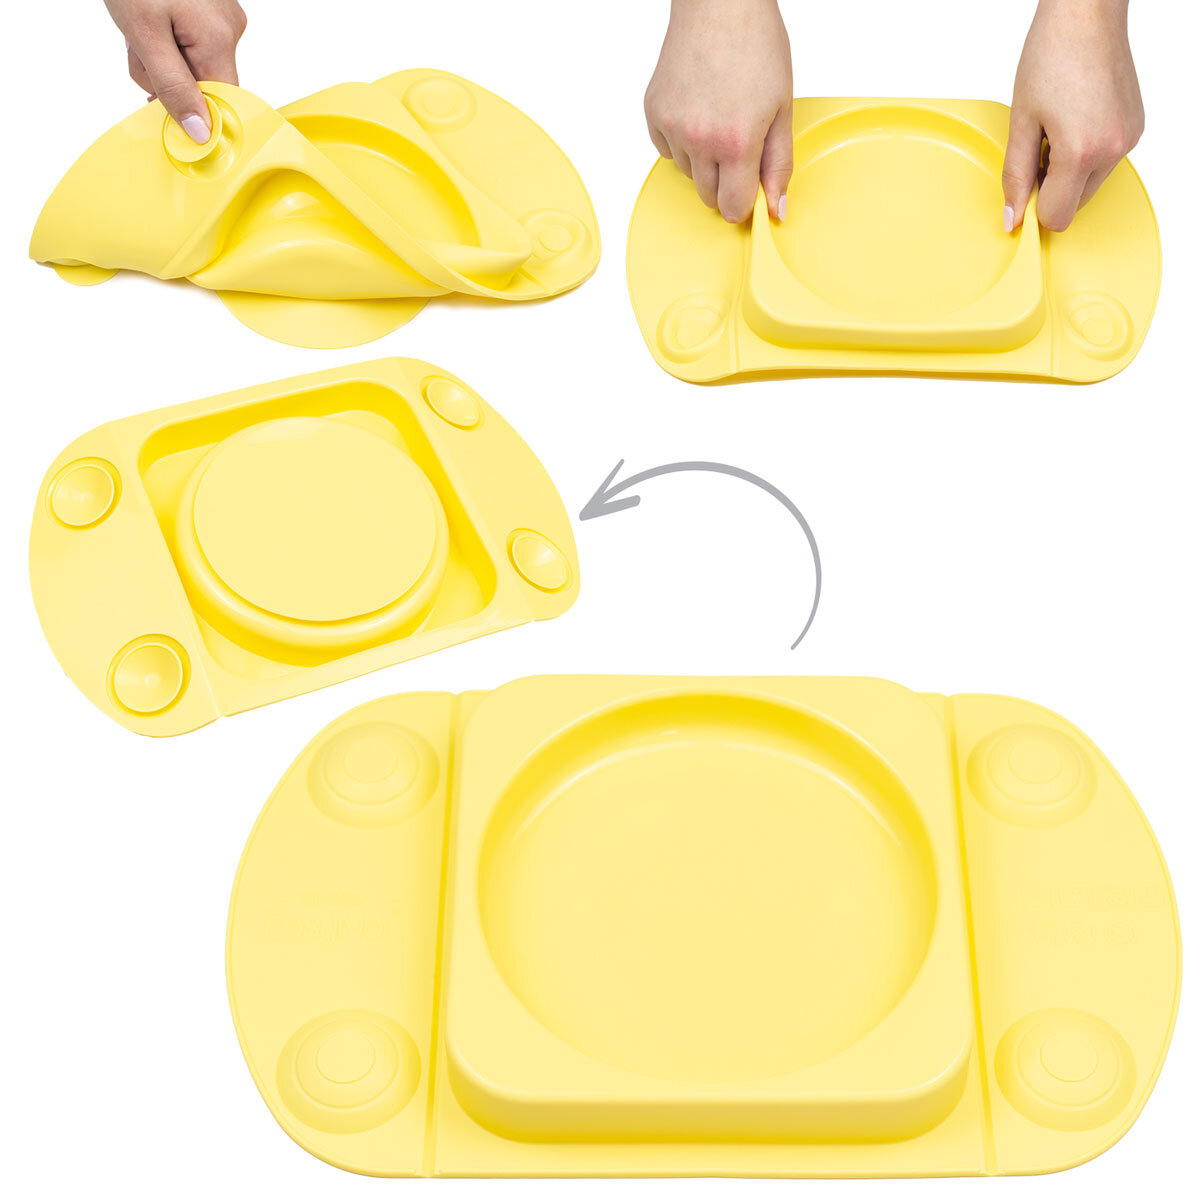 EasyMat Mini Max Open Suction Weaning Plate Assortment, Yellow